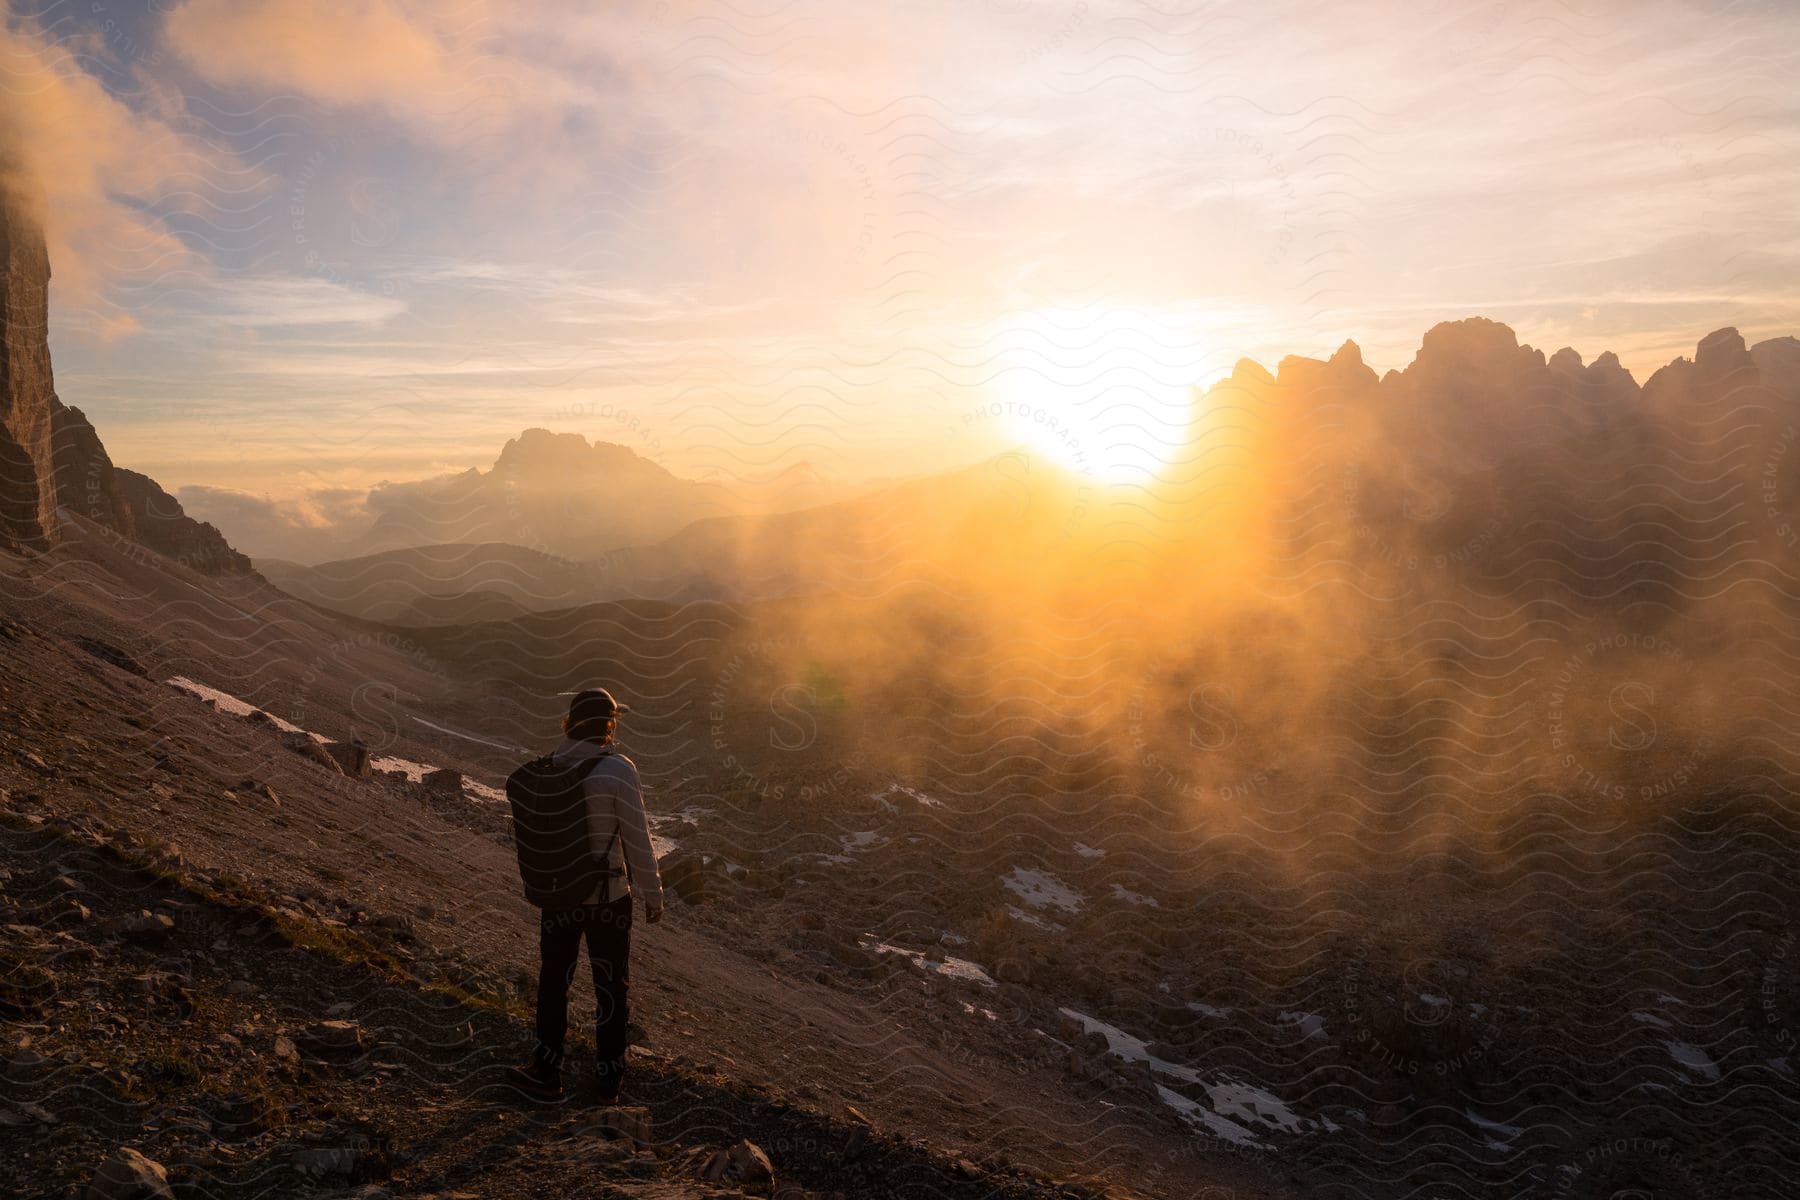 A hiker stares at the sun as it rises over a mountain range.